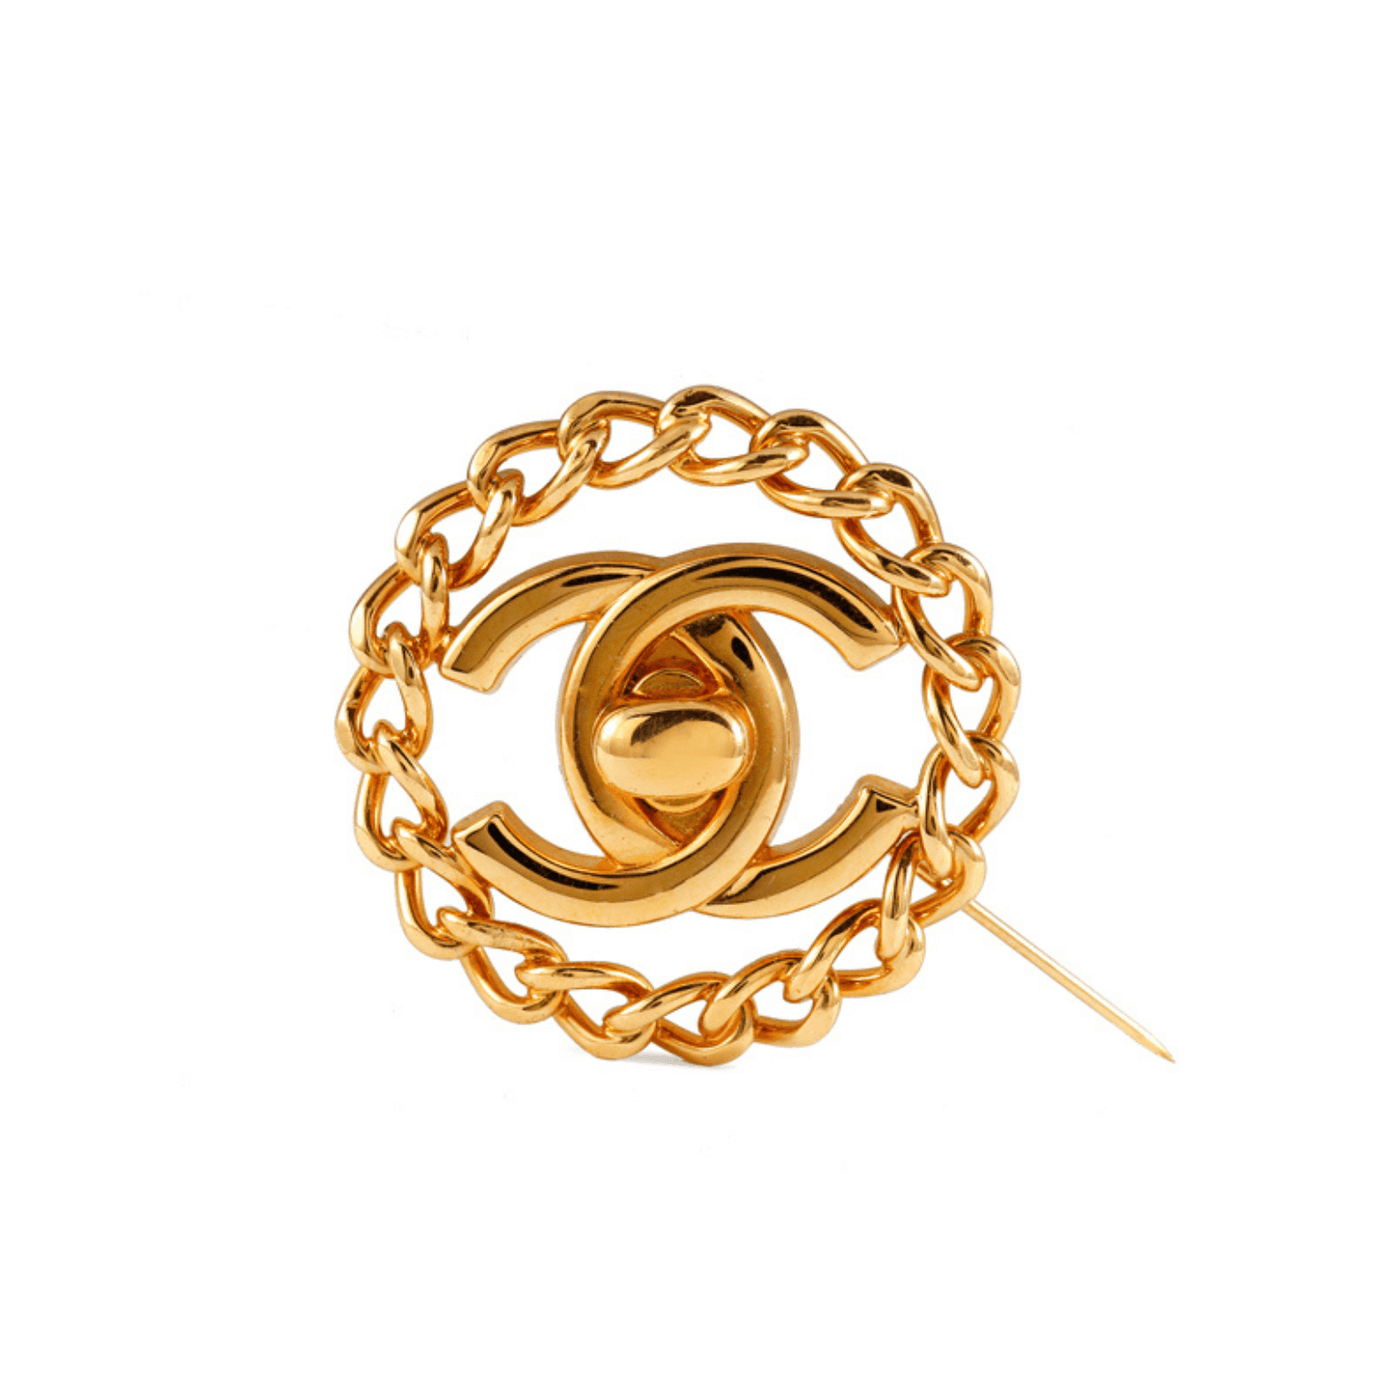 Chanel Gold CC Kiss Lock Clasp Pin with Chain Surrounding - Only Authentics